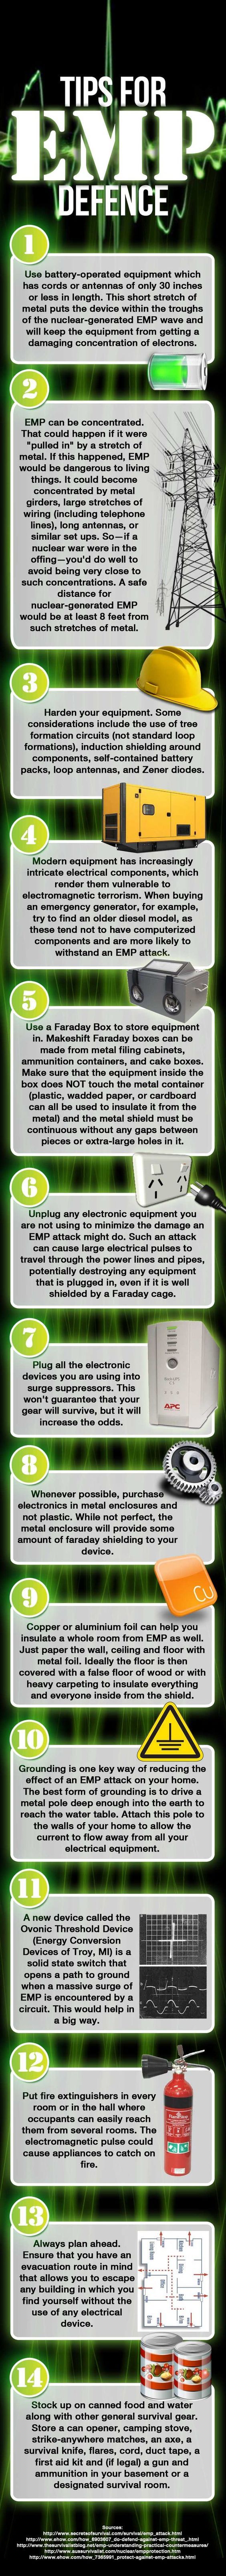 Infographic: Tips for EMP………